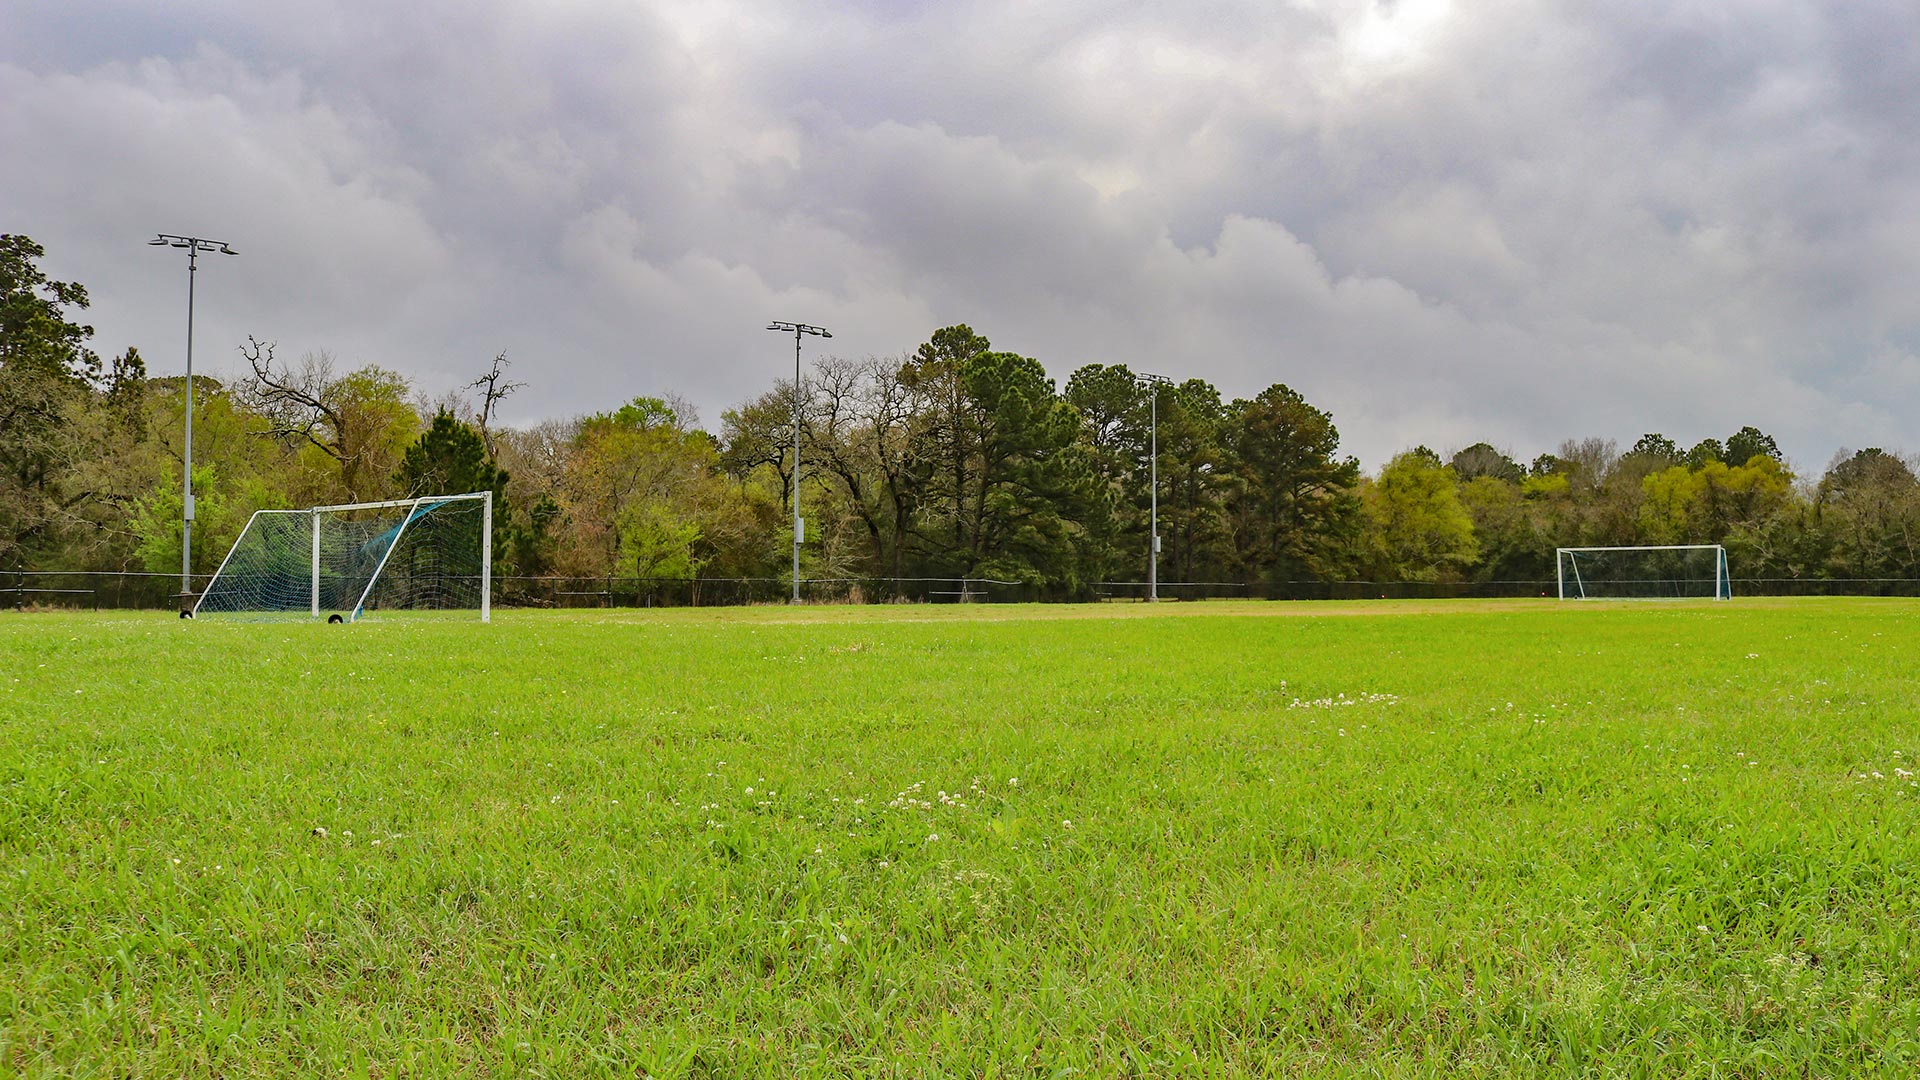 An outdoor athletic field with soccer goals at the Delta Field Complex